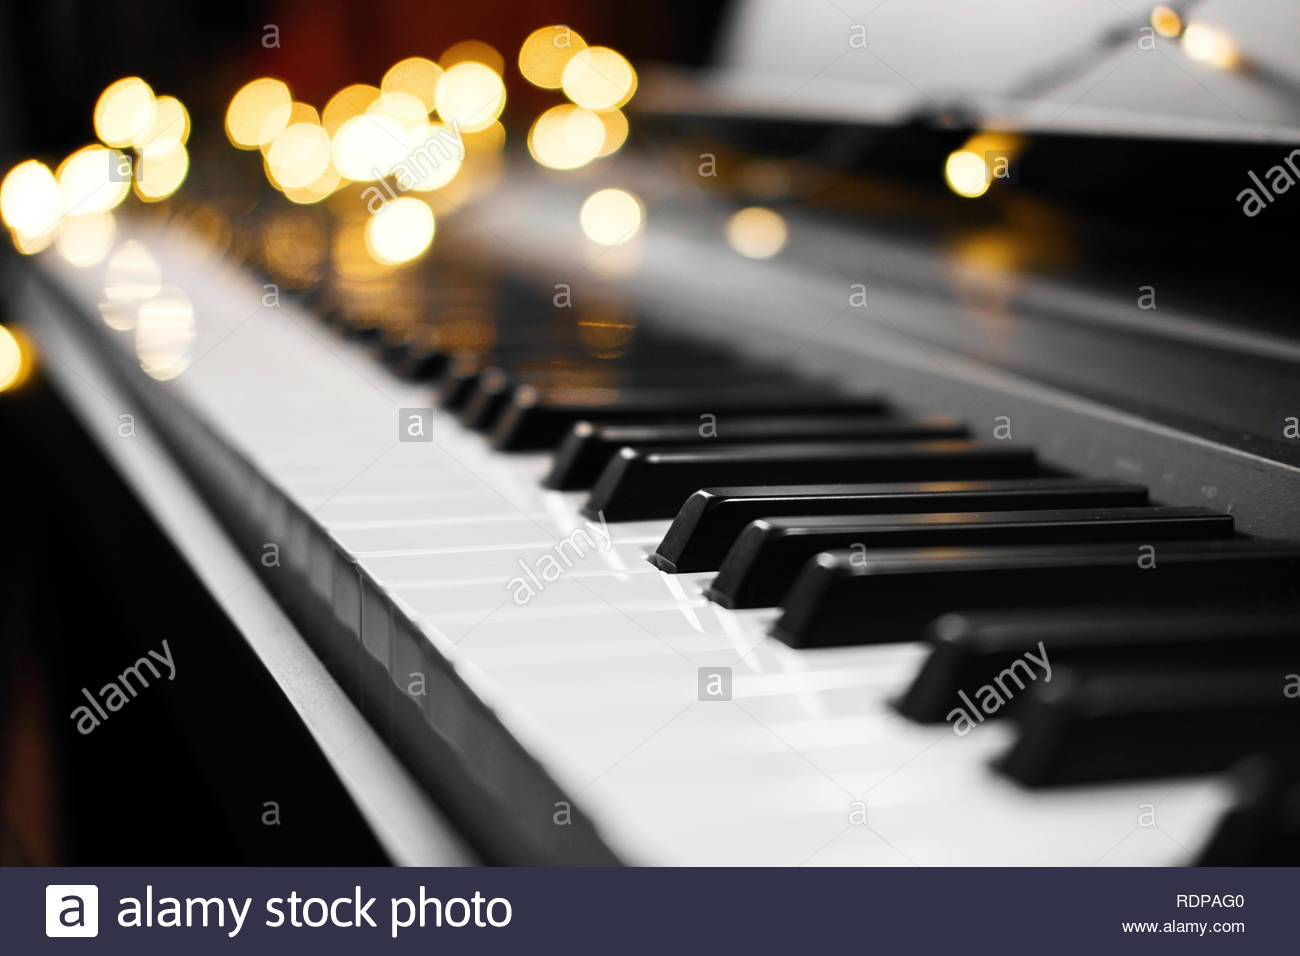 Piano Keys With Beautiful Yellow Lights Bokeh In Background